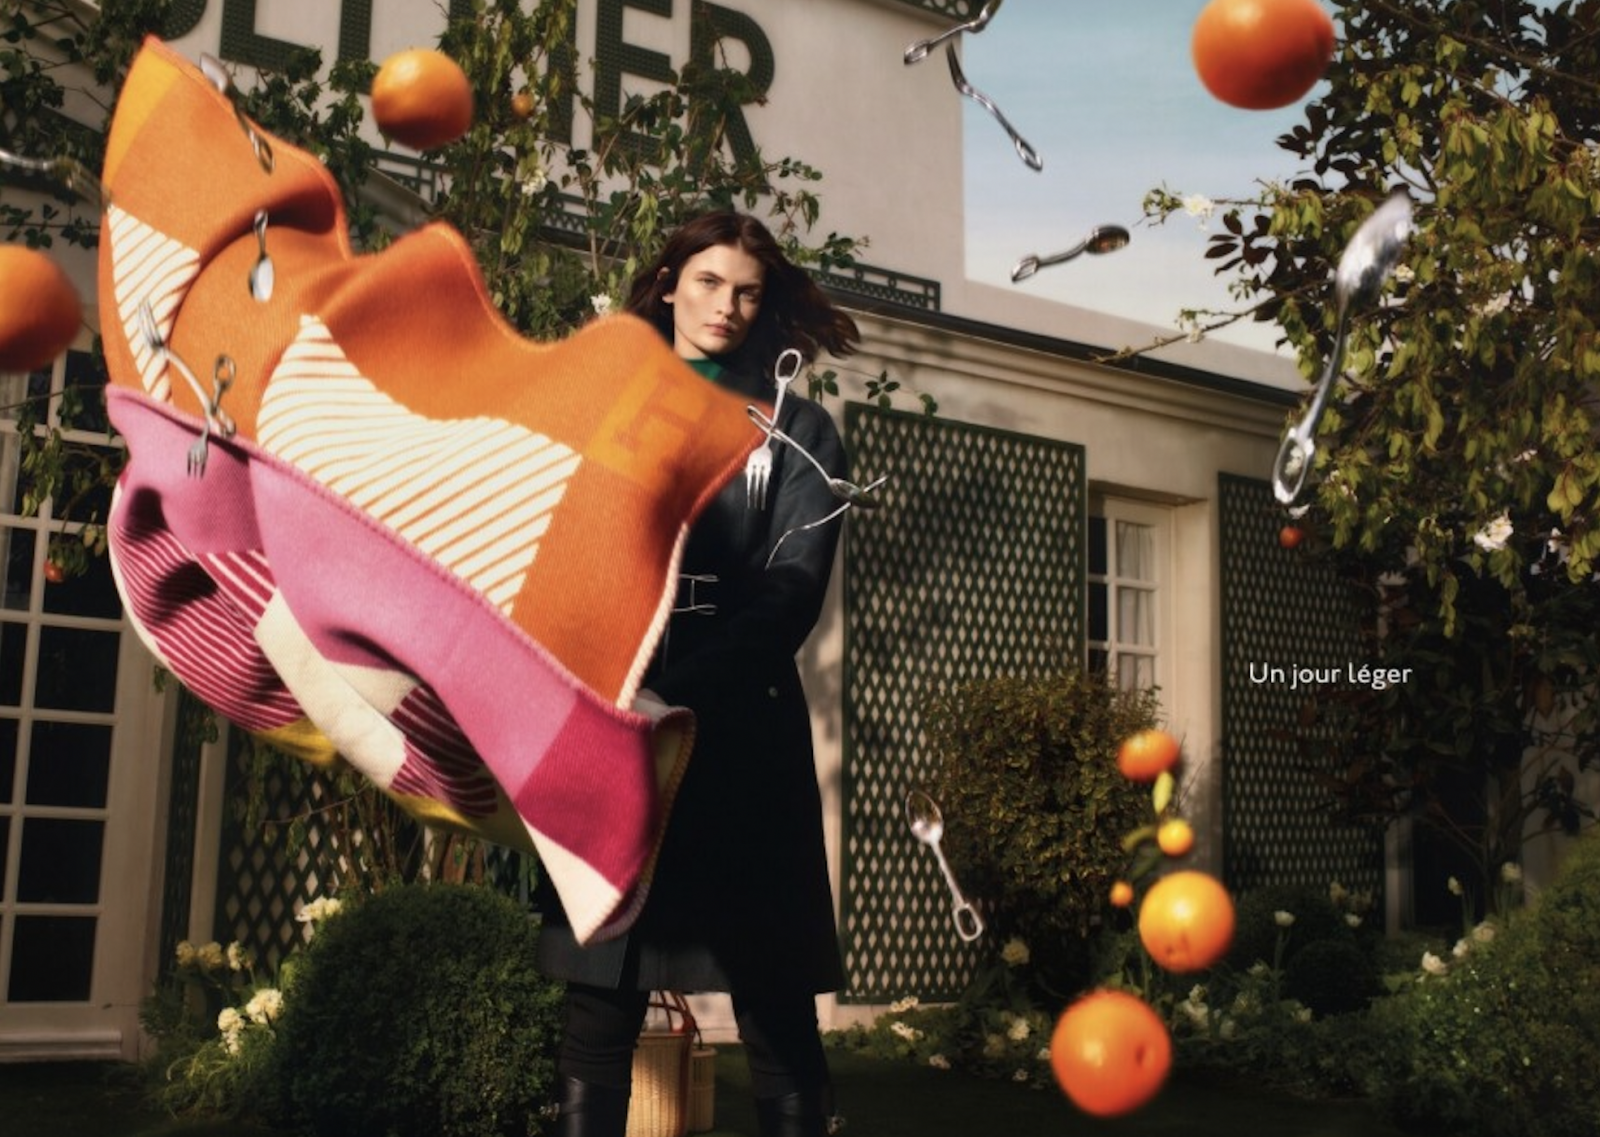 hermes ad campaign